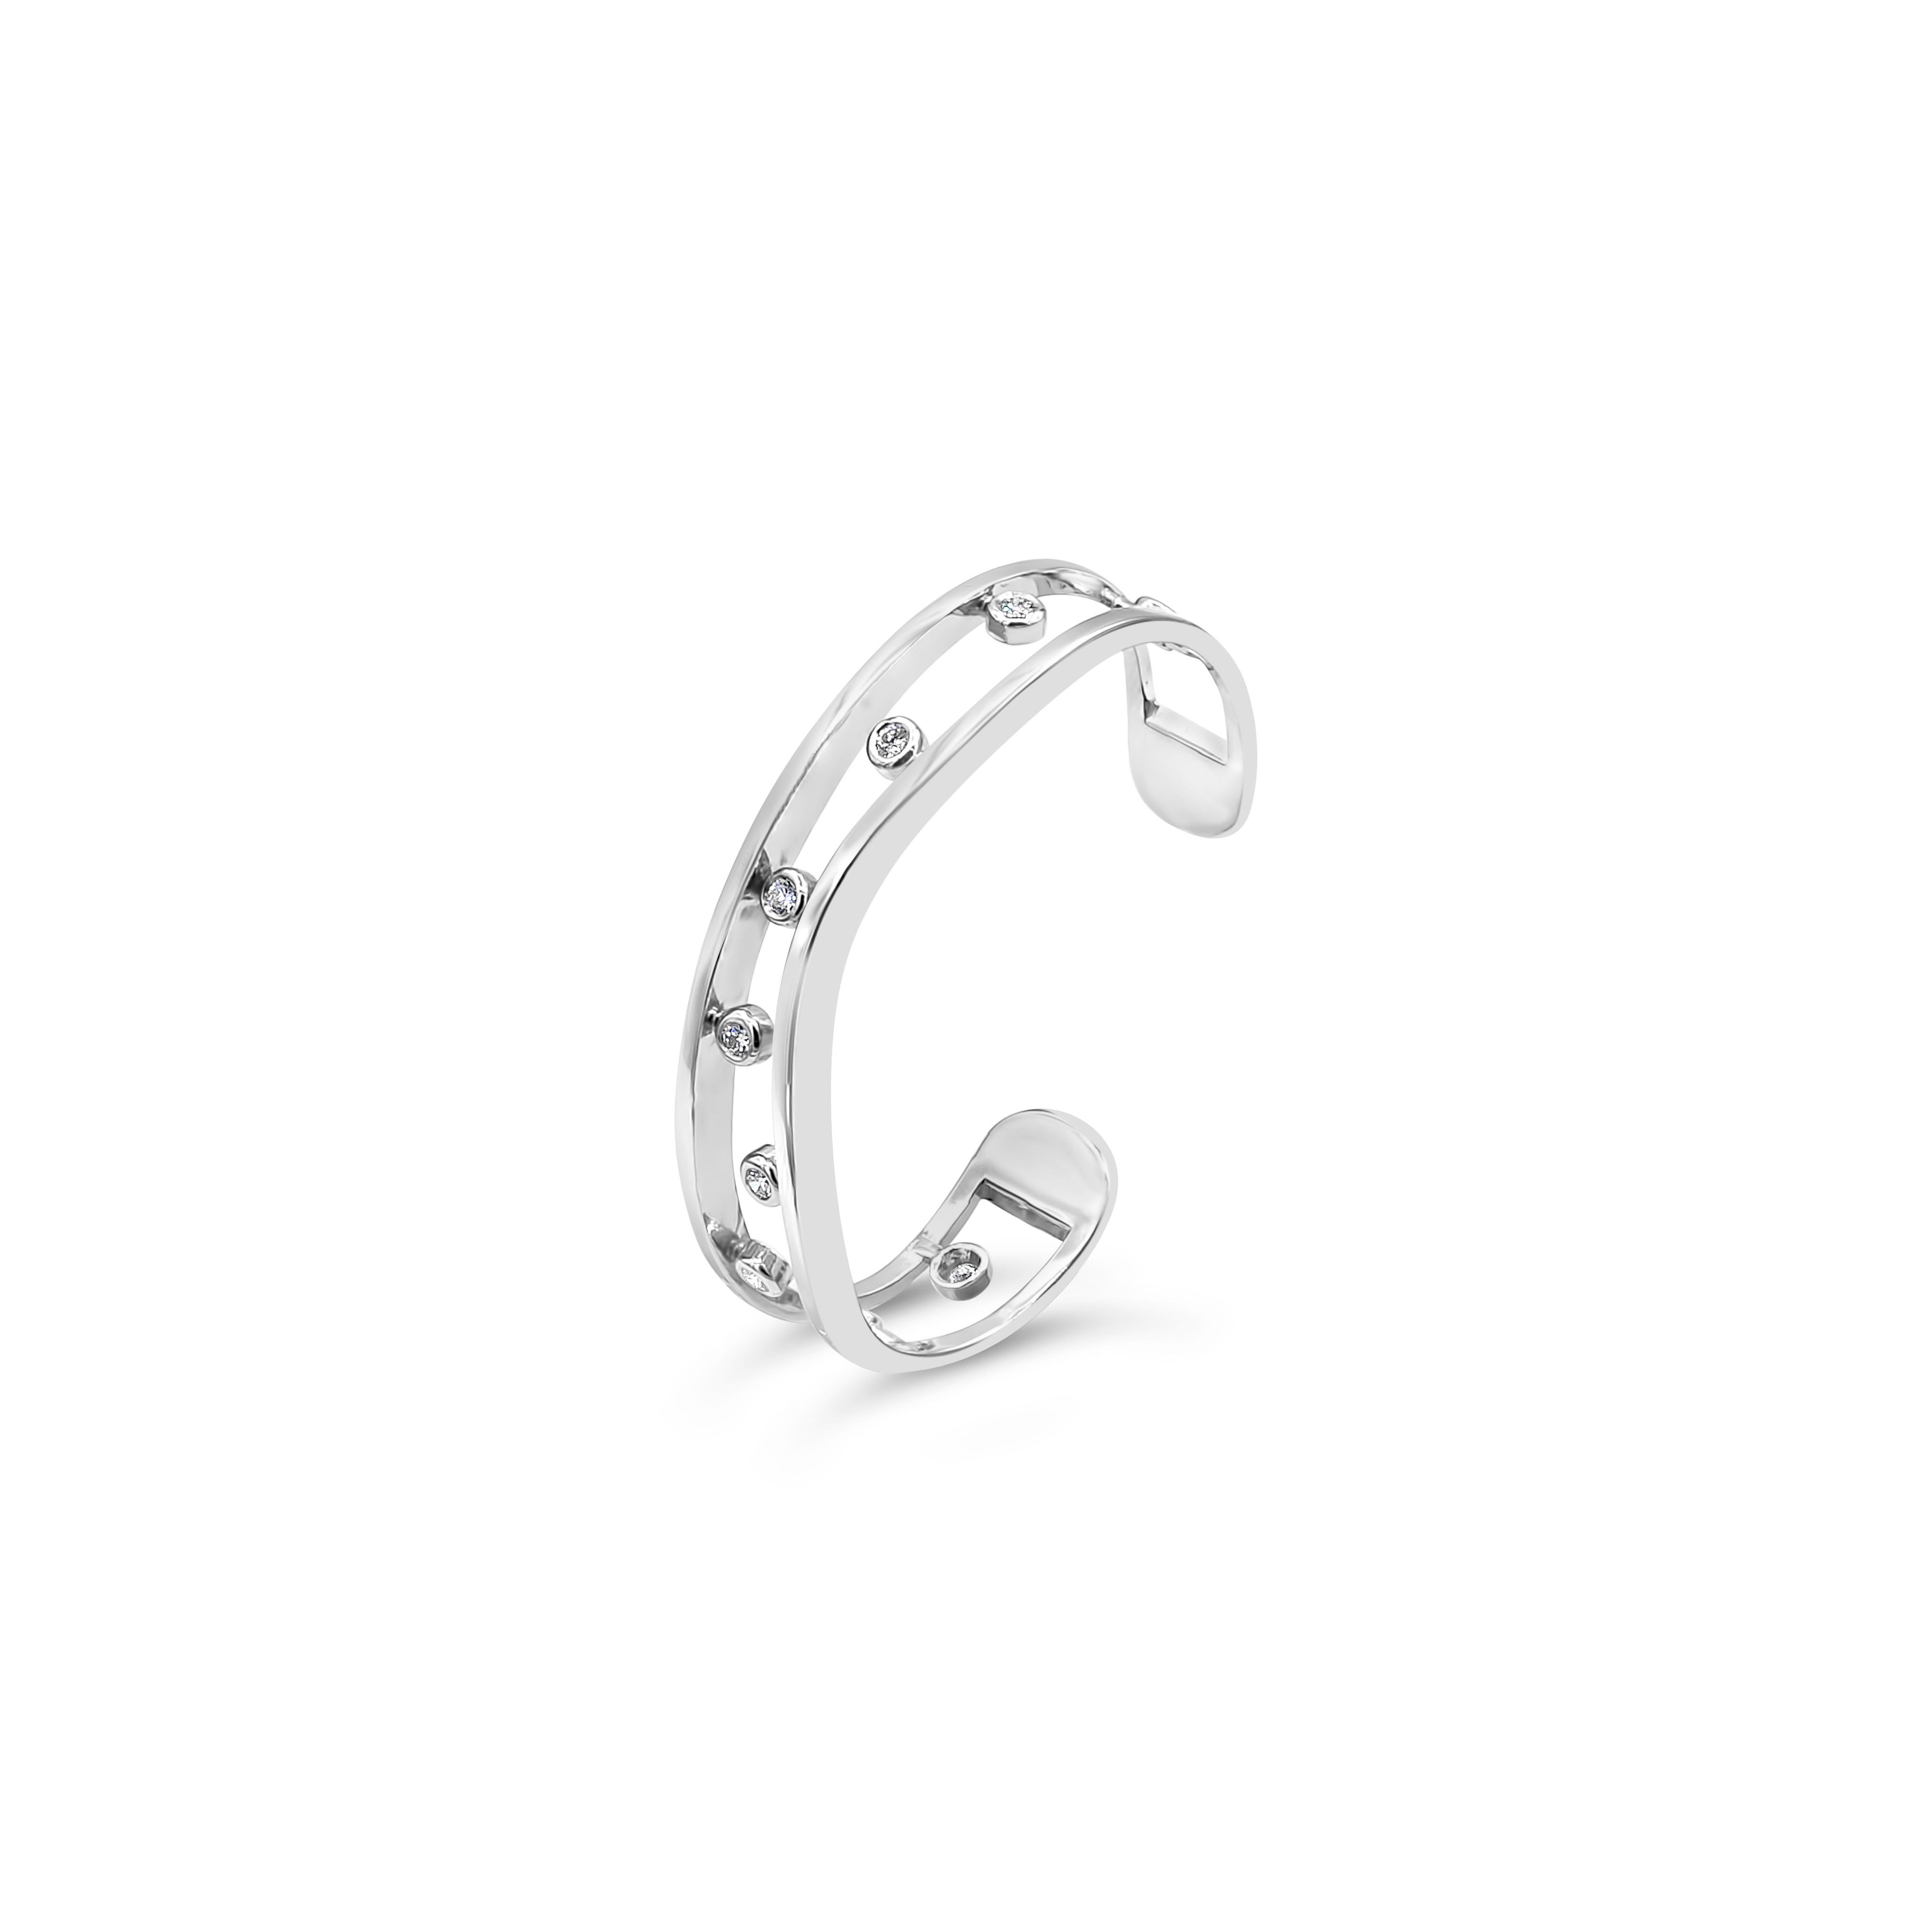 A simple piece of cuff bracelet showcasing bezel set round diamonds, set in a chic open-work design. Diamonds weigh 0.65 carats total. Bracelet weighs 15.70 grams. Made in 14K white gold. Small size and only fits a small wrist.

Roman Malakov is a